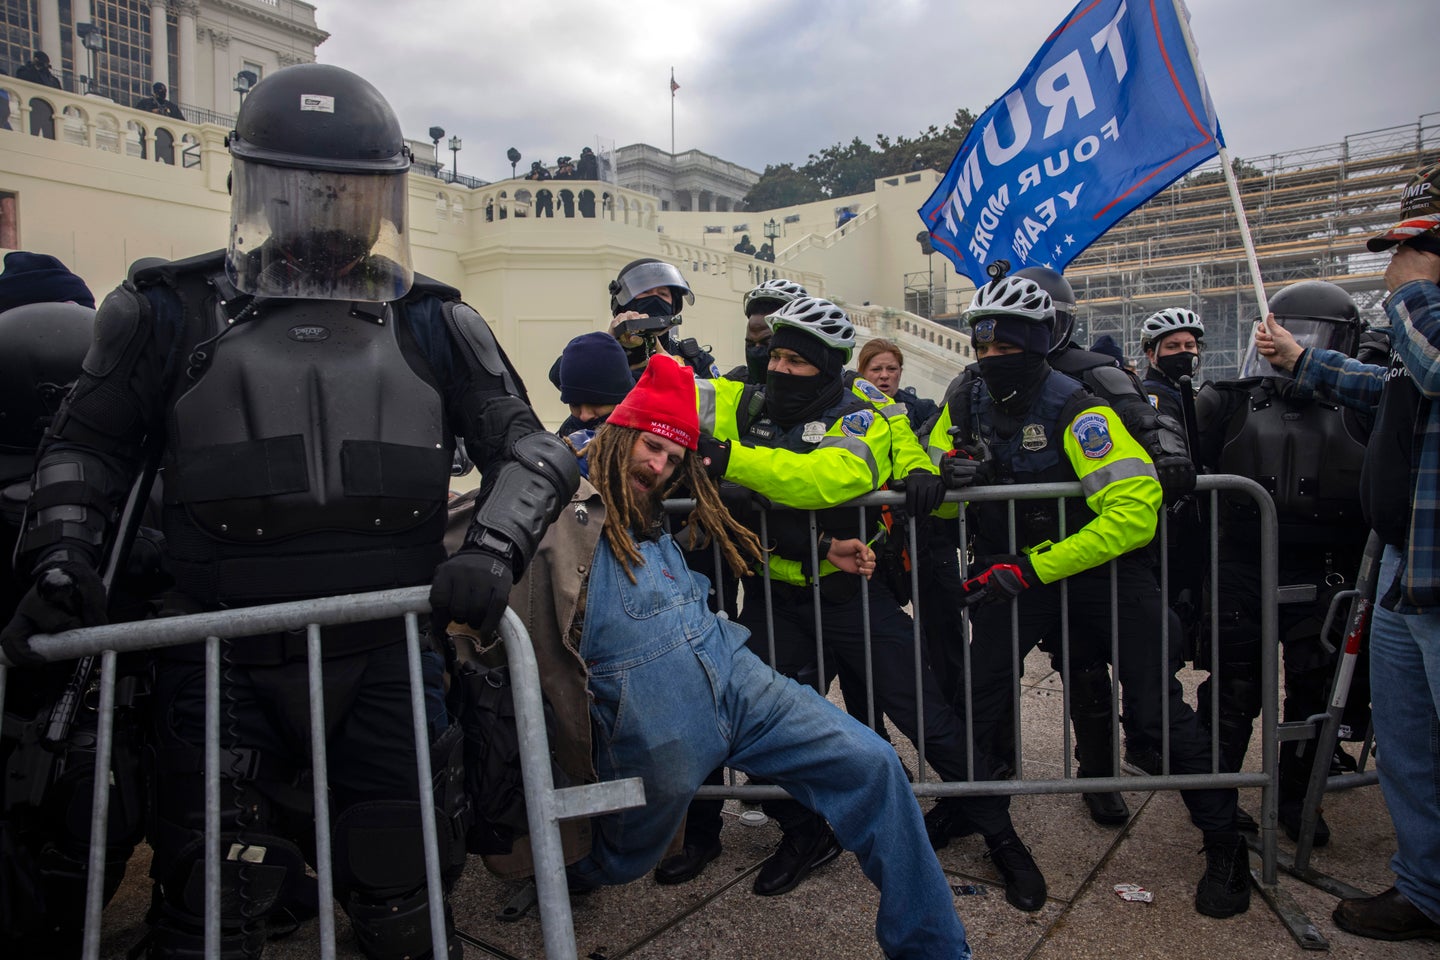 WASHINGTON, DC - JANUARY 06: Trump supporters clash with police and security forces as people try to storm the US Capitol in Washington D.C on January 6, 2021. Demonstrators breeched security and entered the Capitol as Congress debated the 2020 presidential election Electoral Vote Certification. (photo by Brent Stirton/Getty Images)